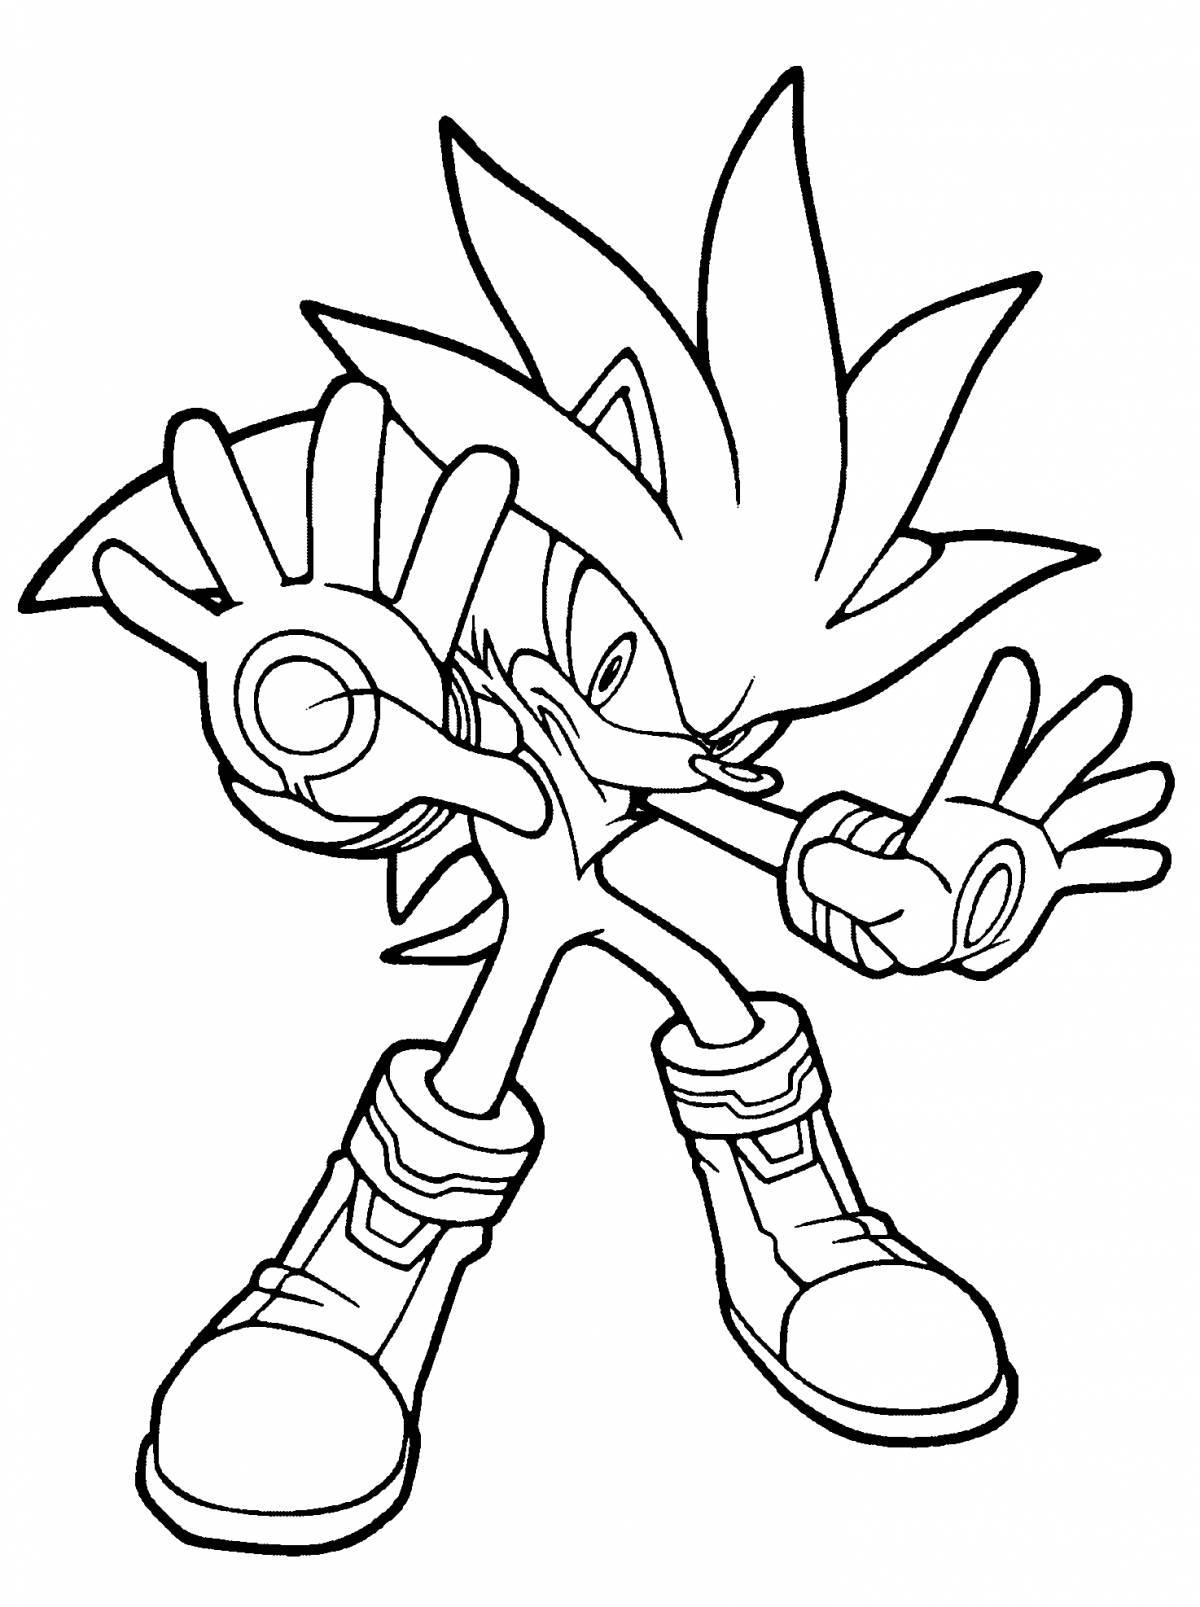 Awesome sonic coloring book for kids